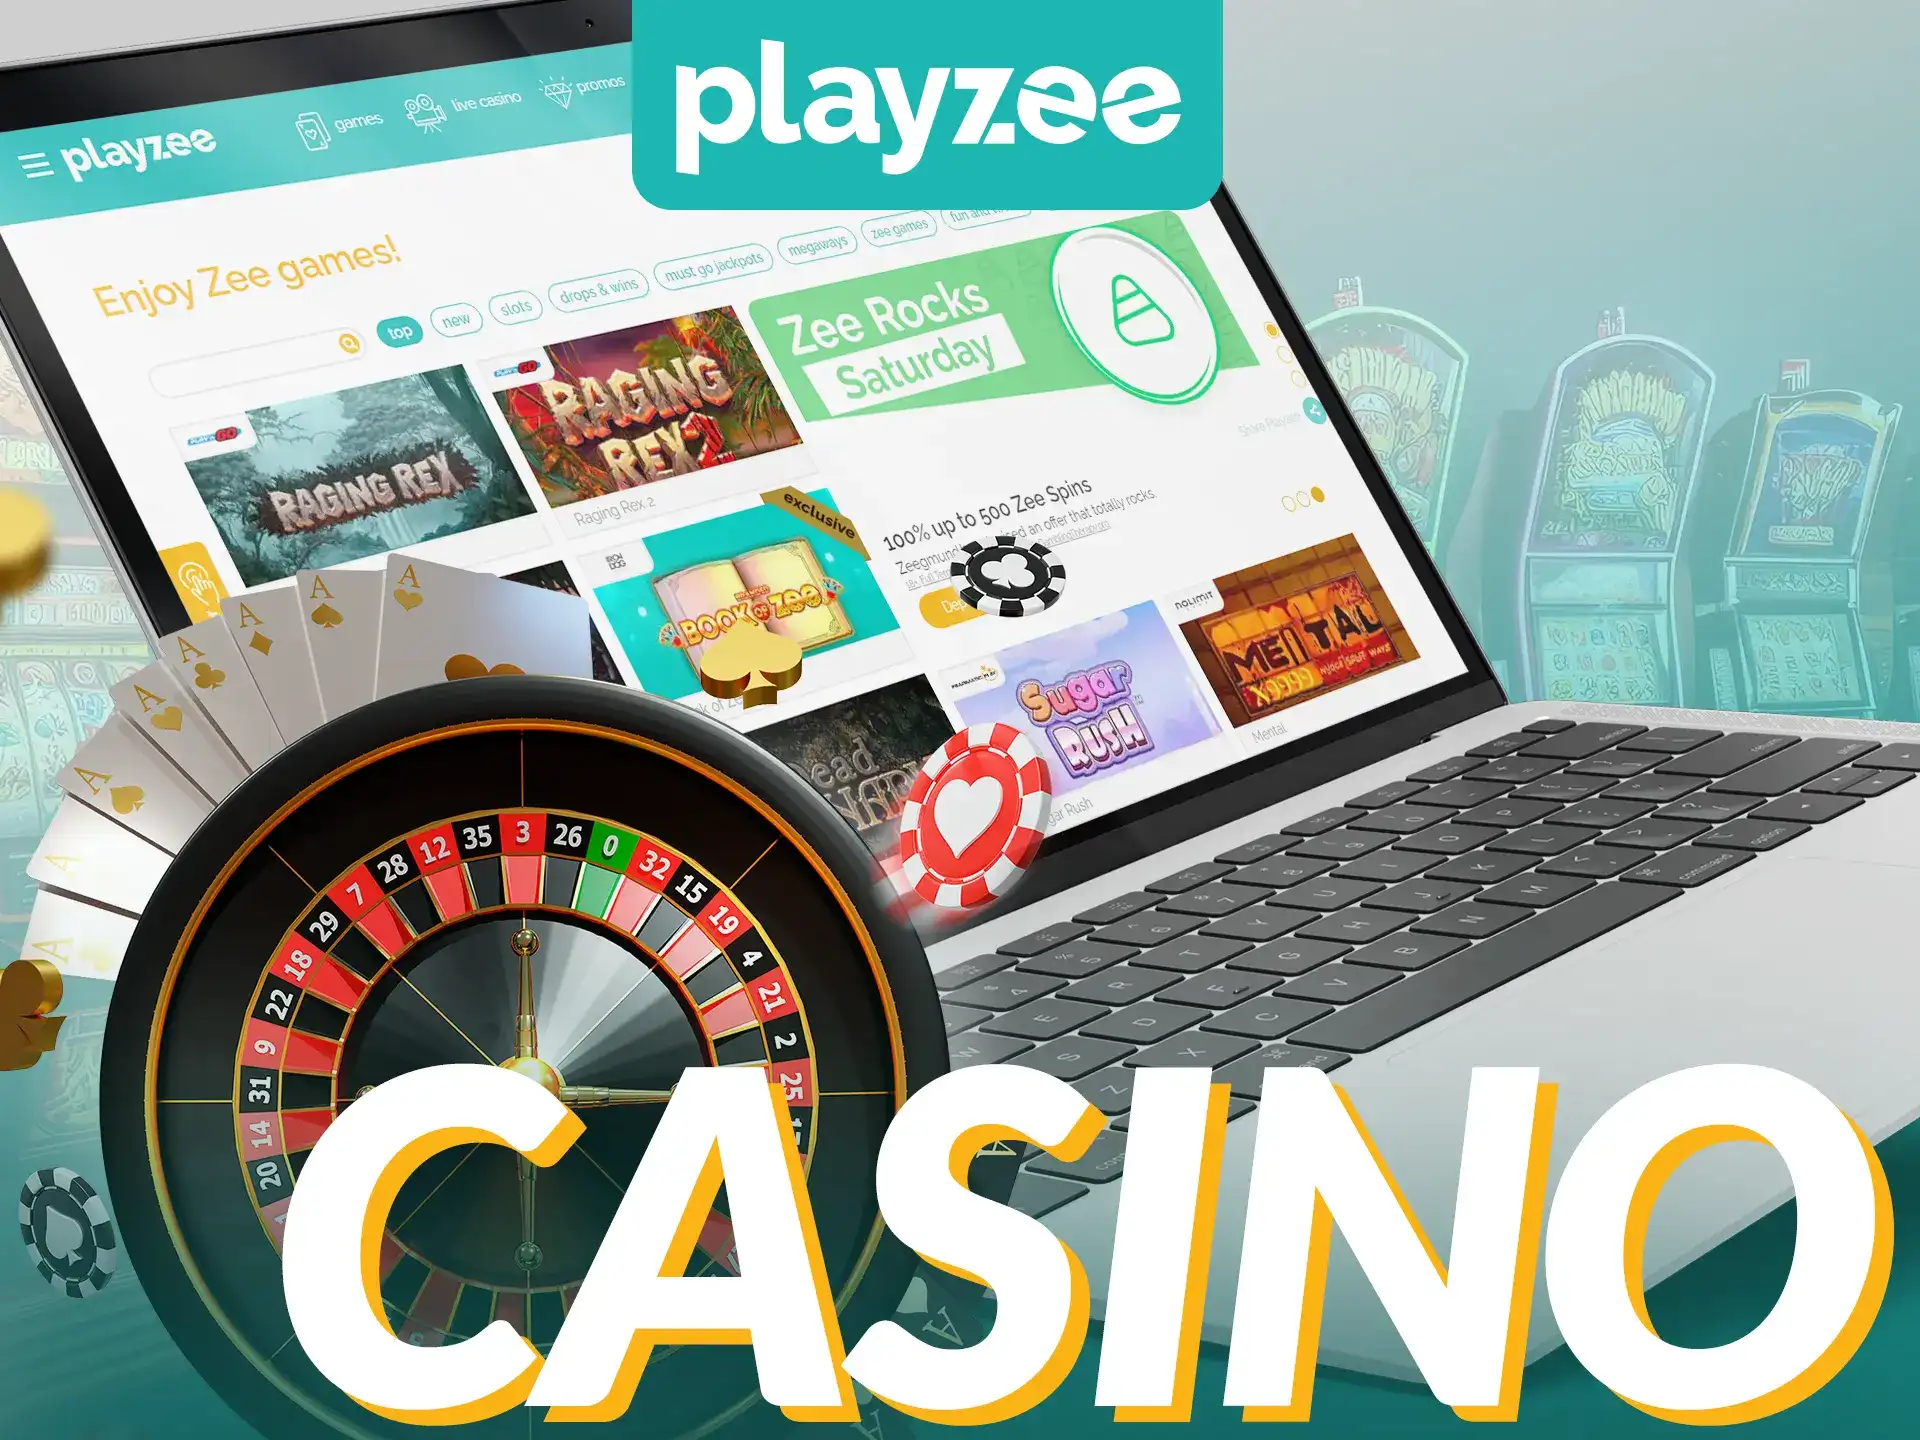 Playzee online casino offers its users a wide variety of games.